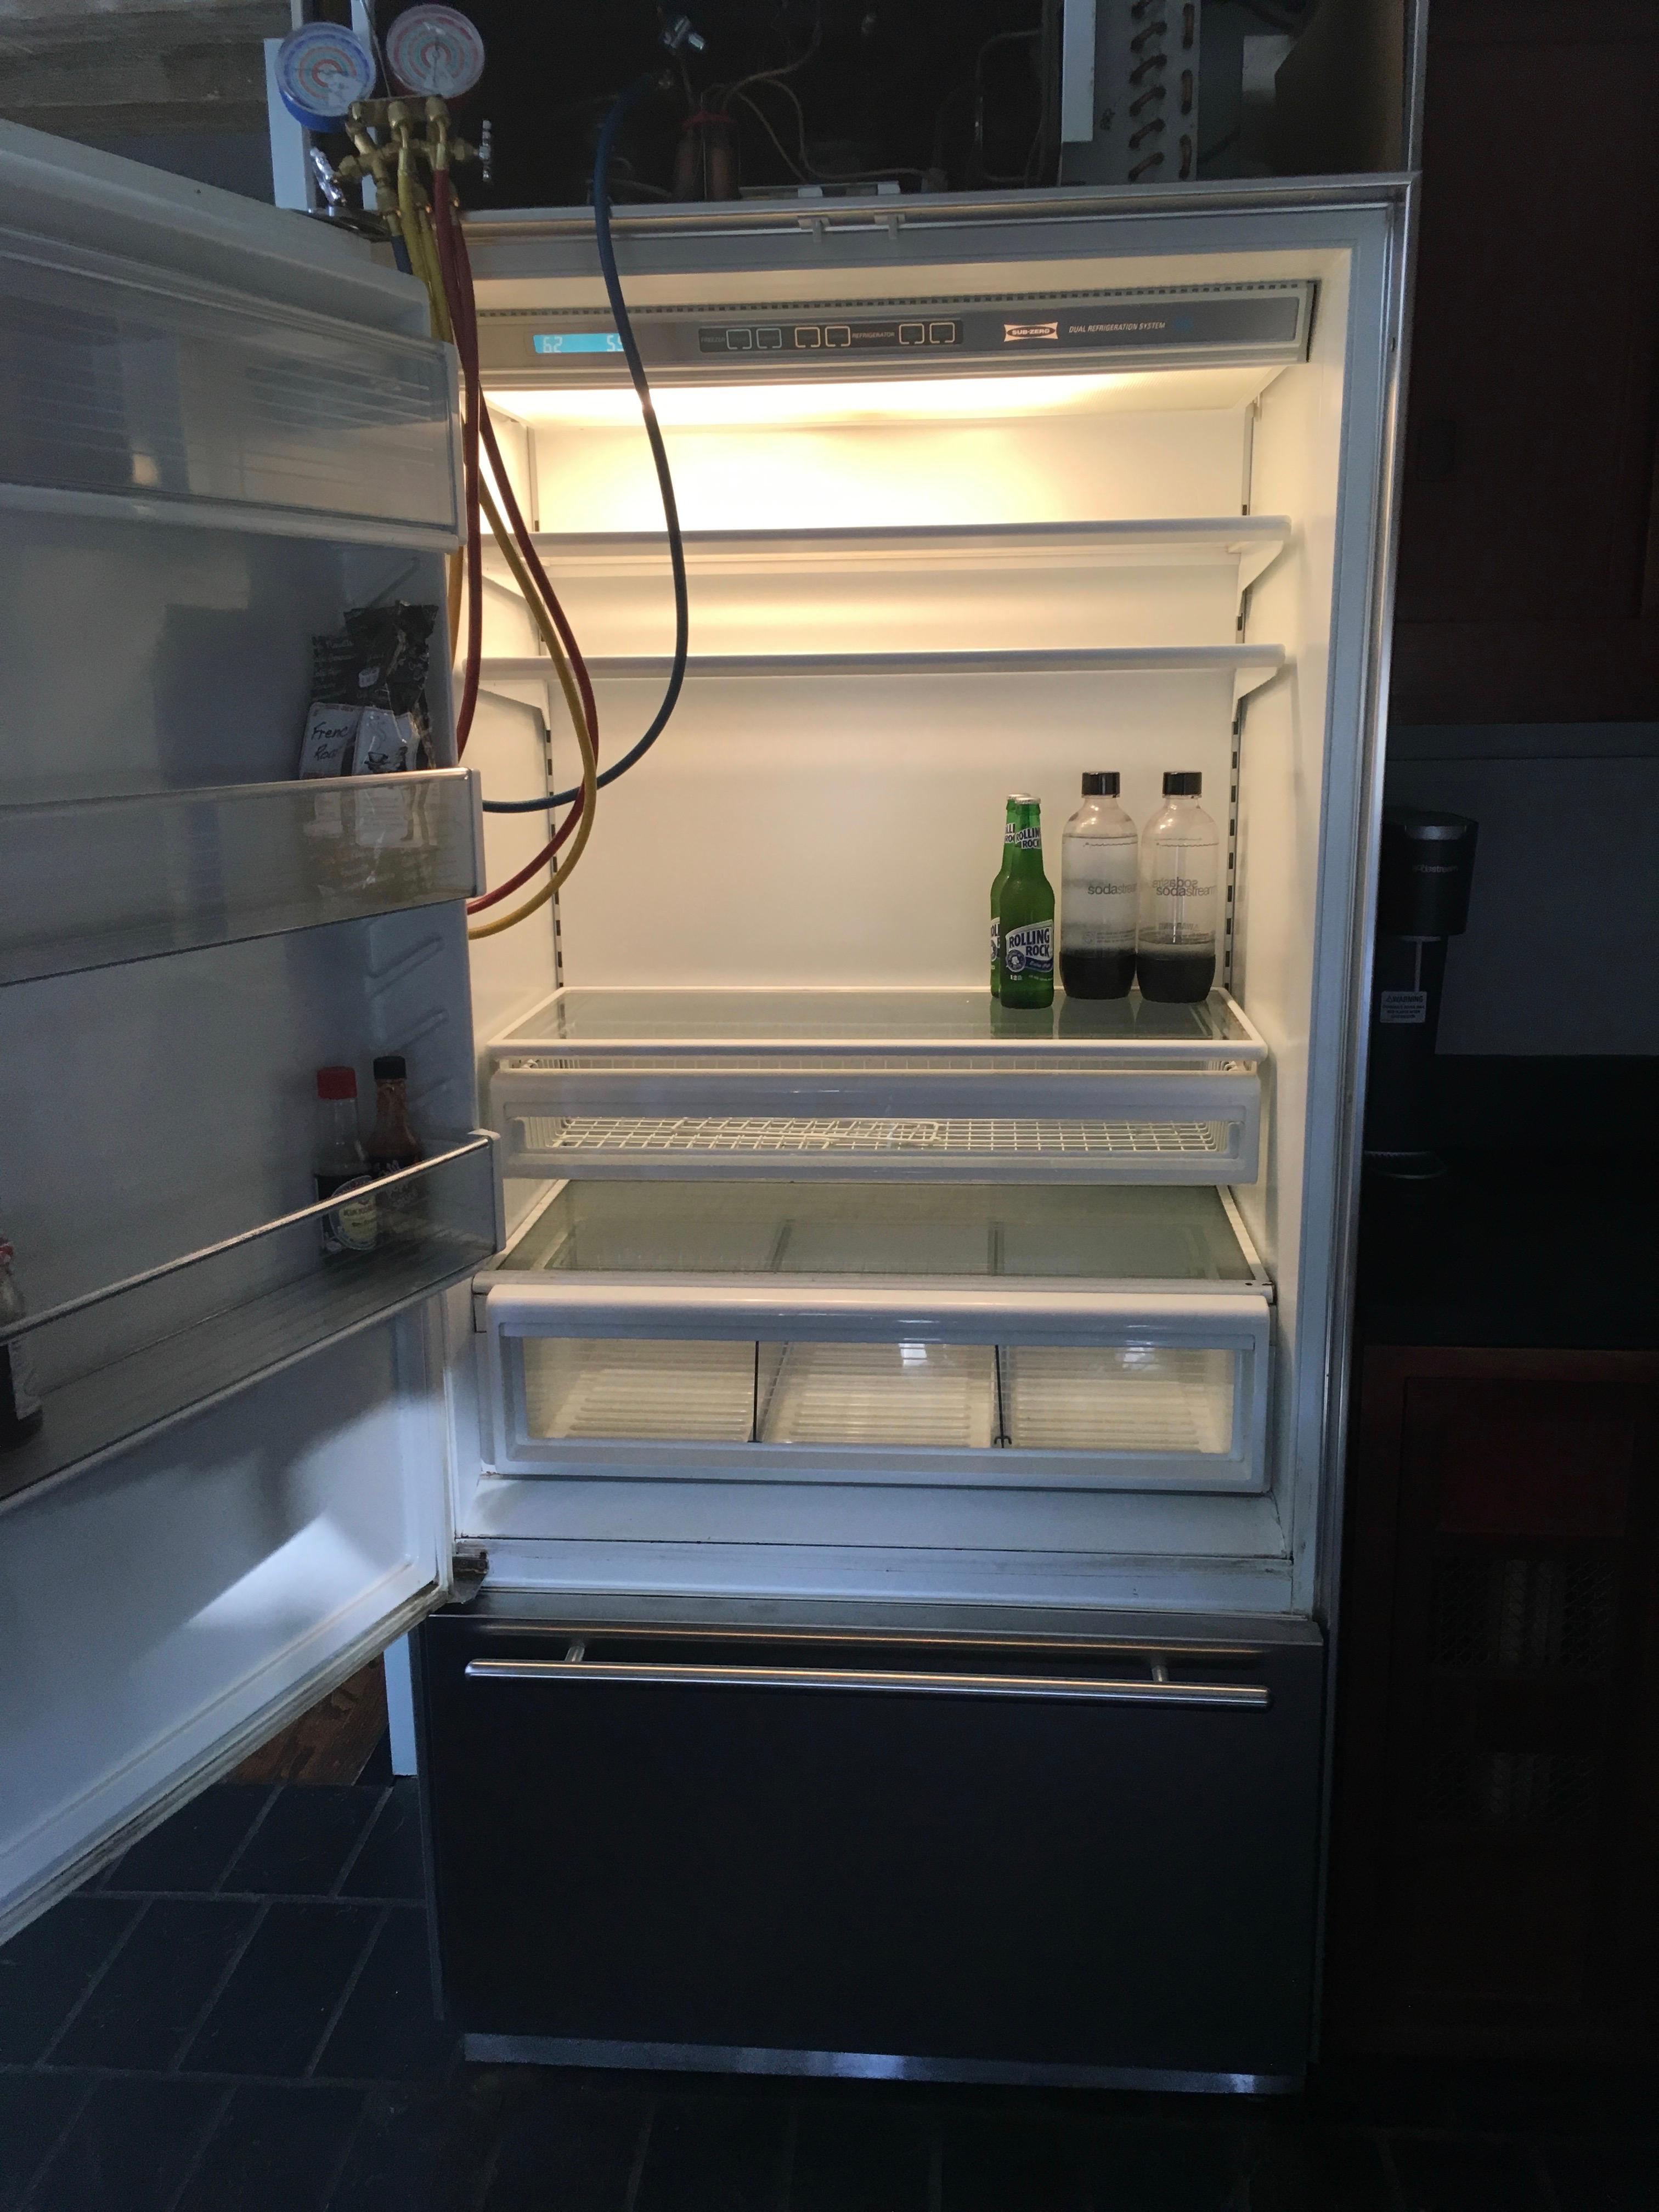 Picture of FixEm Appliance Repair fixed this Sub-Zero refrigerator which was leaking water. - FixEm Appliance Repair